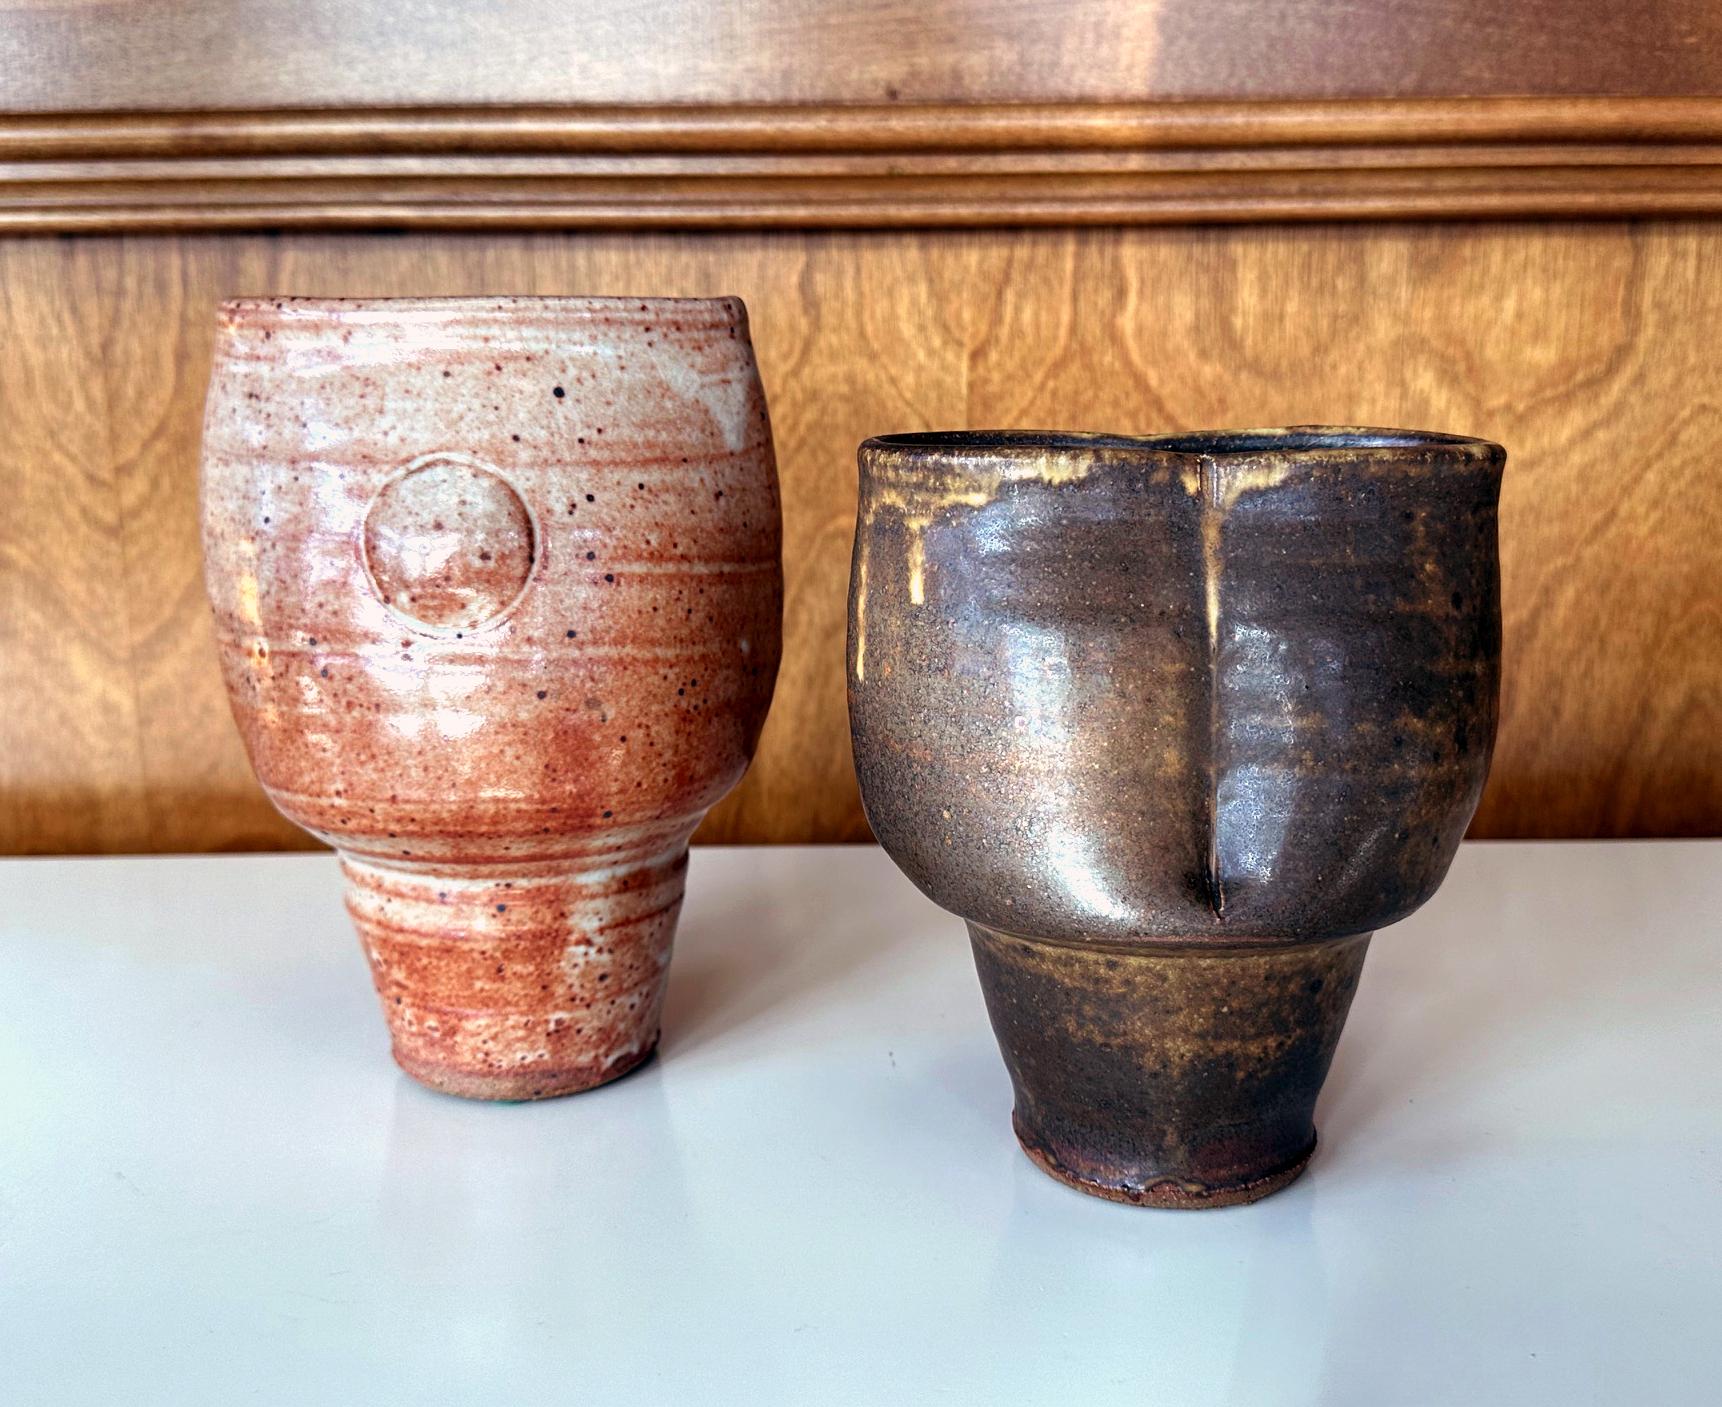 An assemble of two stemmed cylinder-shape stoneware vases by American studio potter Warren MacKenzie (1924-2018). The two vases have a complementary form and silouette and display nicely together. The surface of the slightly taller vase is covered